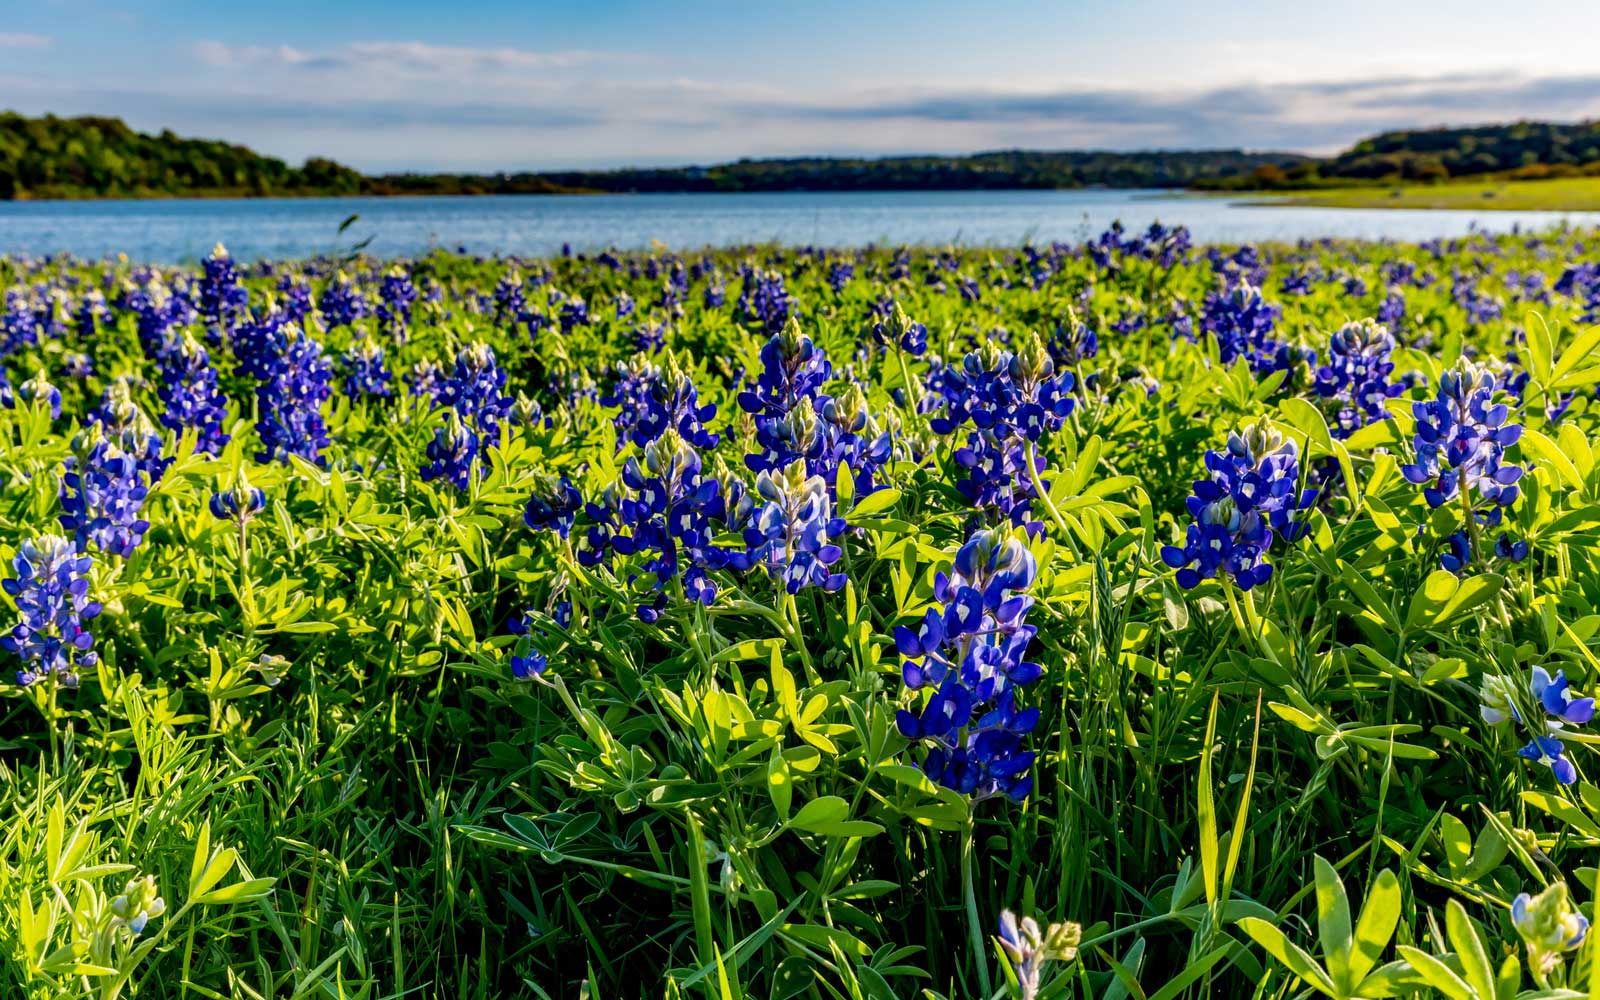 The Best Places to See Flowers Bloom This Spring. Travel + Leisure